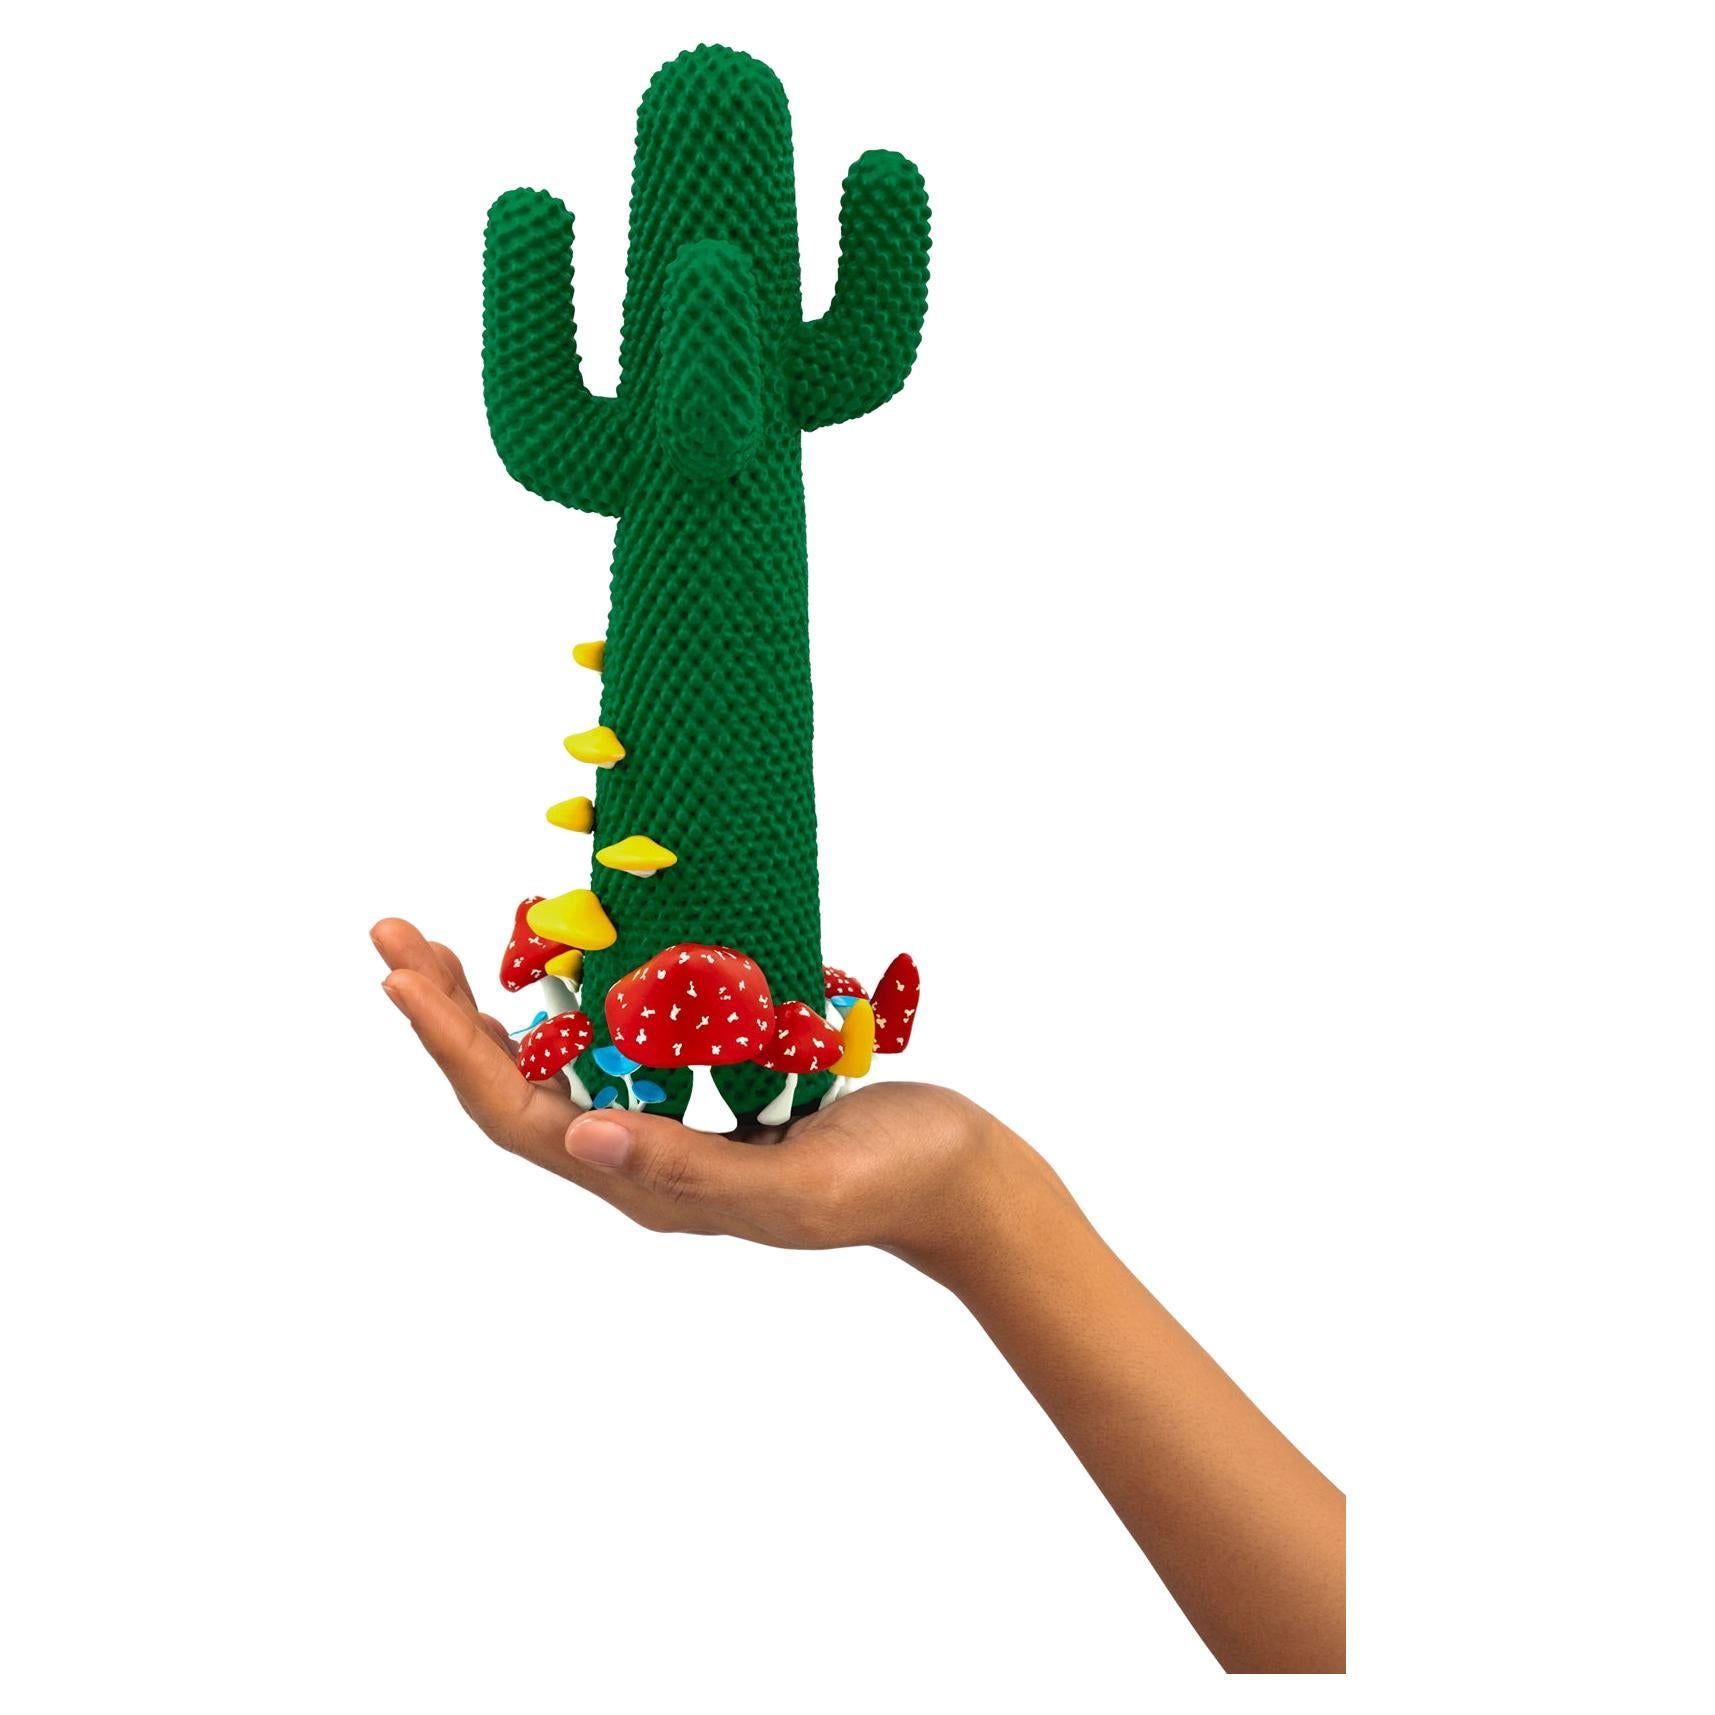 LIMITED EDITION #58/99

Gufram presents the miniaturised version of the Shroom CACTUS® created in collaboration with A$AP Rocky and the artist’s new design studio HOMMEMADE Exactly as the real-size Shroom CACTUS®, the new Guframini piece features